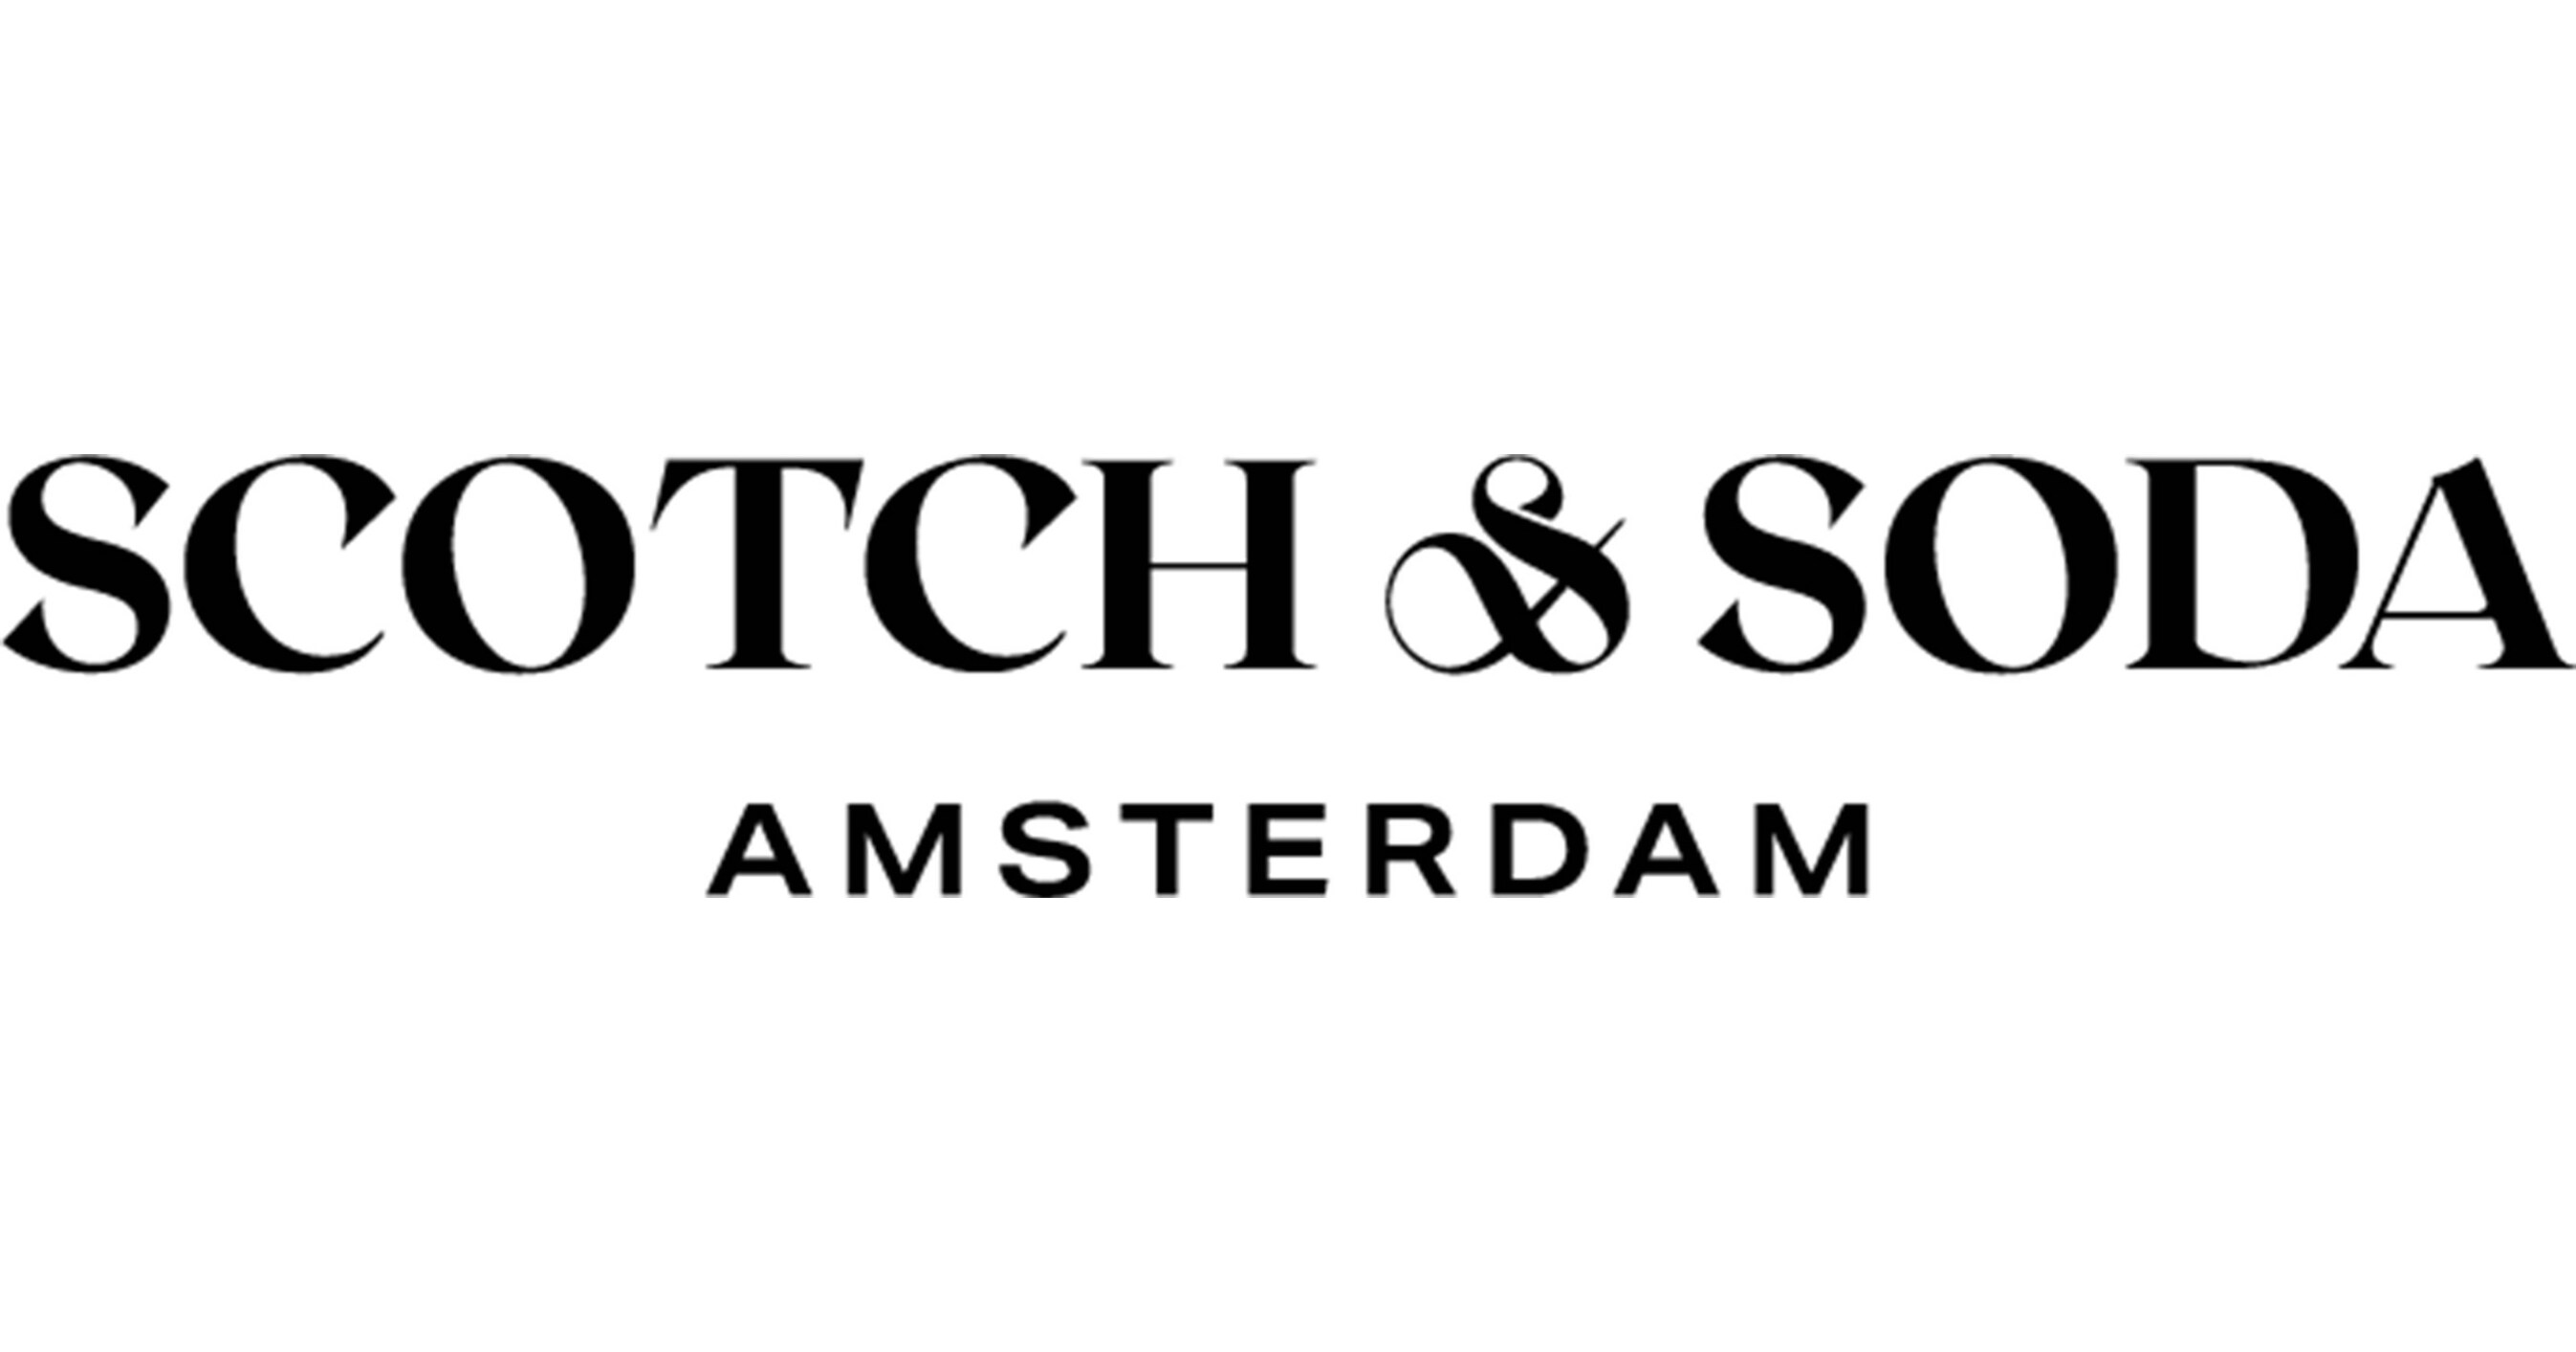 Bluestar Alliance Acquires Scotch & Soda USA Assets and Appoints ...